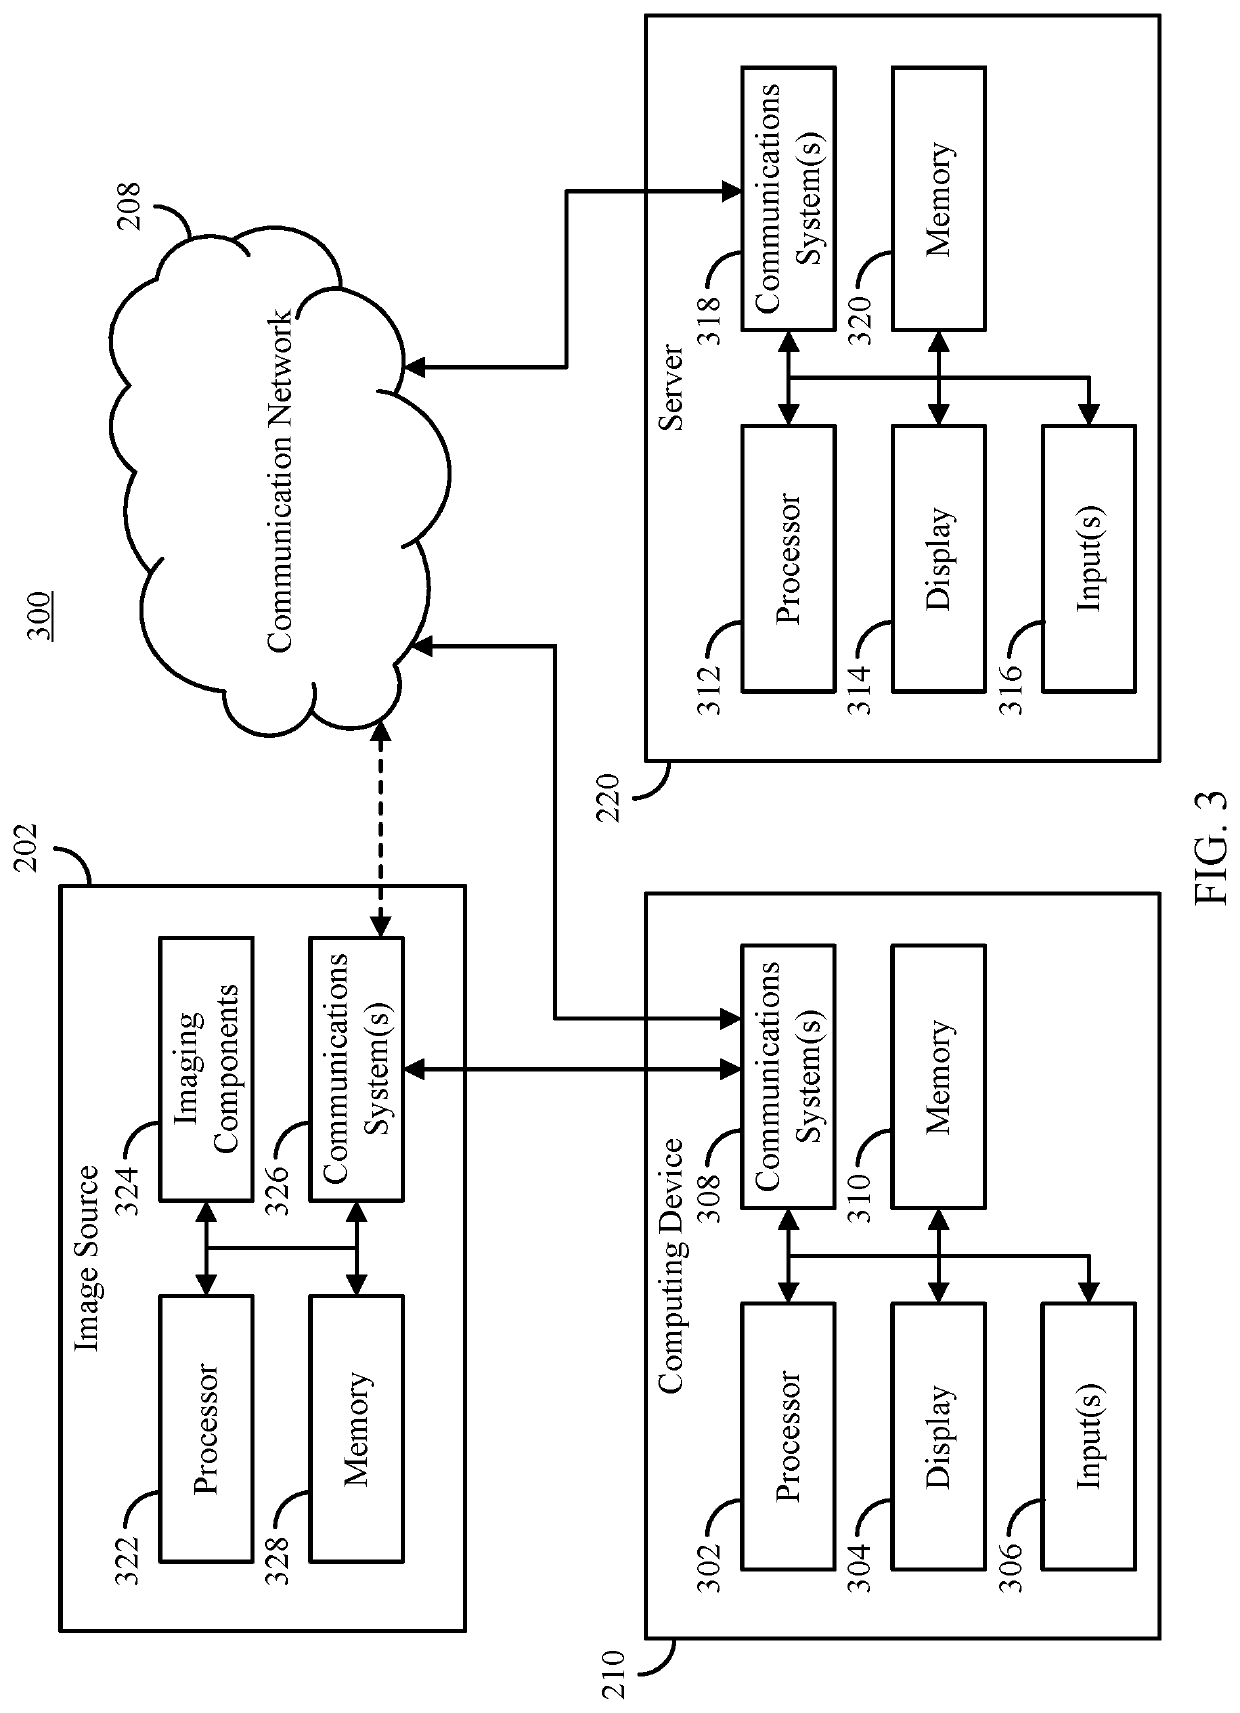 Systems and methods for brain hemorrhage classification in medical images using an artificial intelligence network